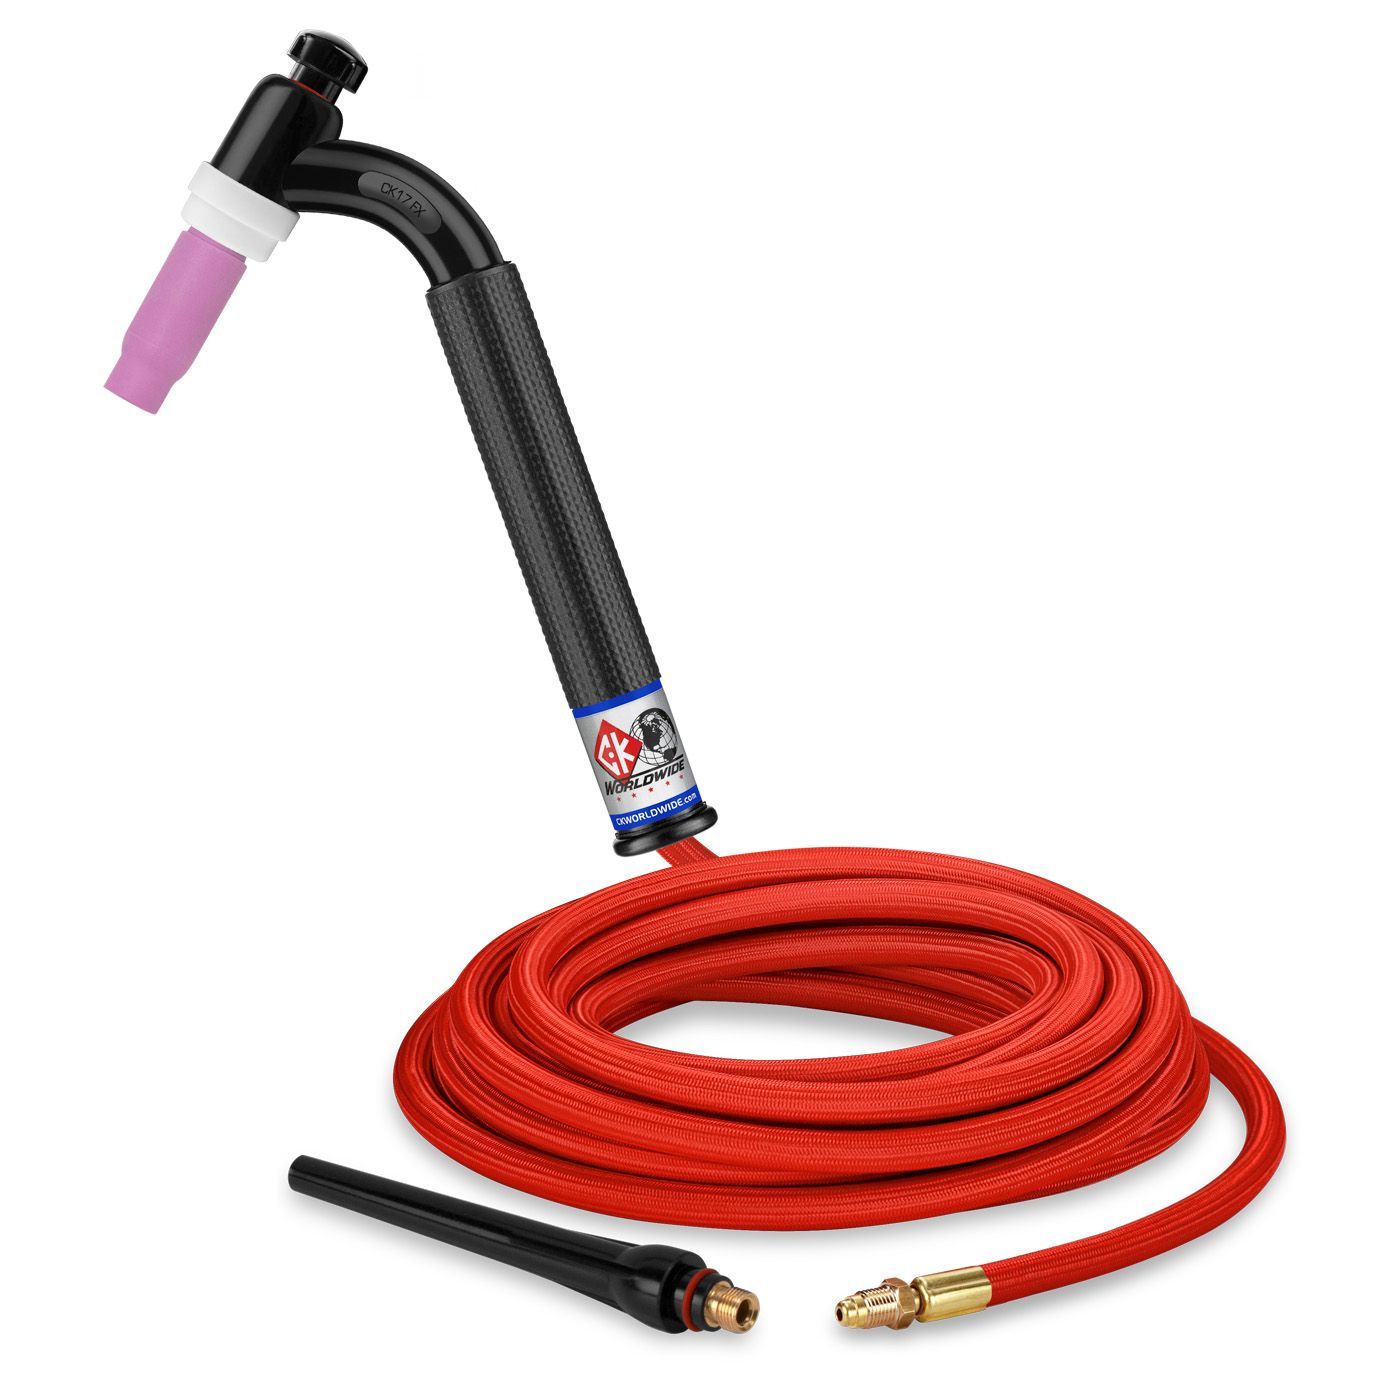 * CK Worldwide | TIG Torch #17 - 3 Series Flex Head (Gas Cooled) (CK17-25RSF-M16F) W/ 25ft. Super Flex Cable + M16 Fitting